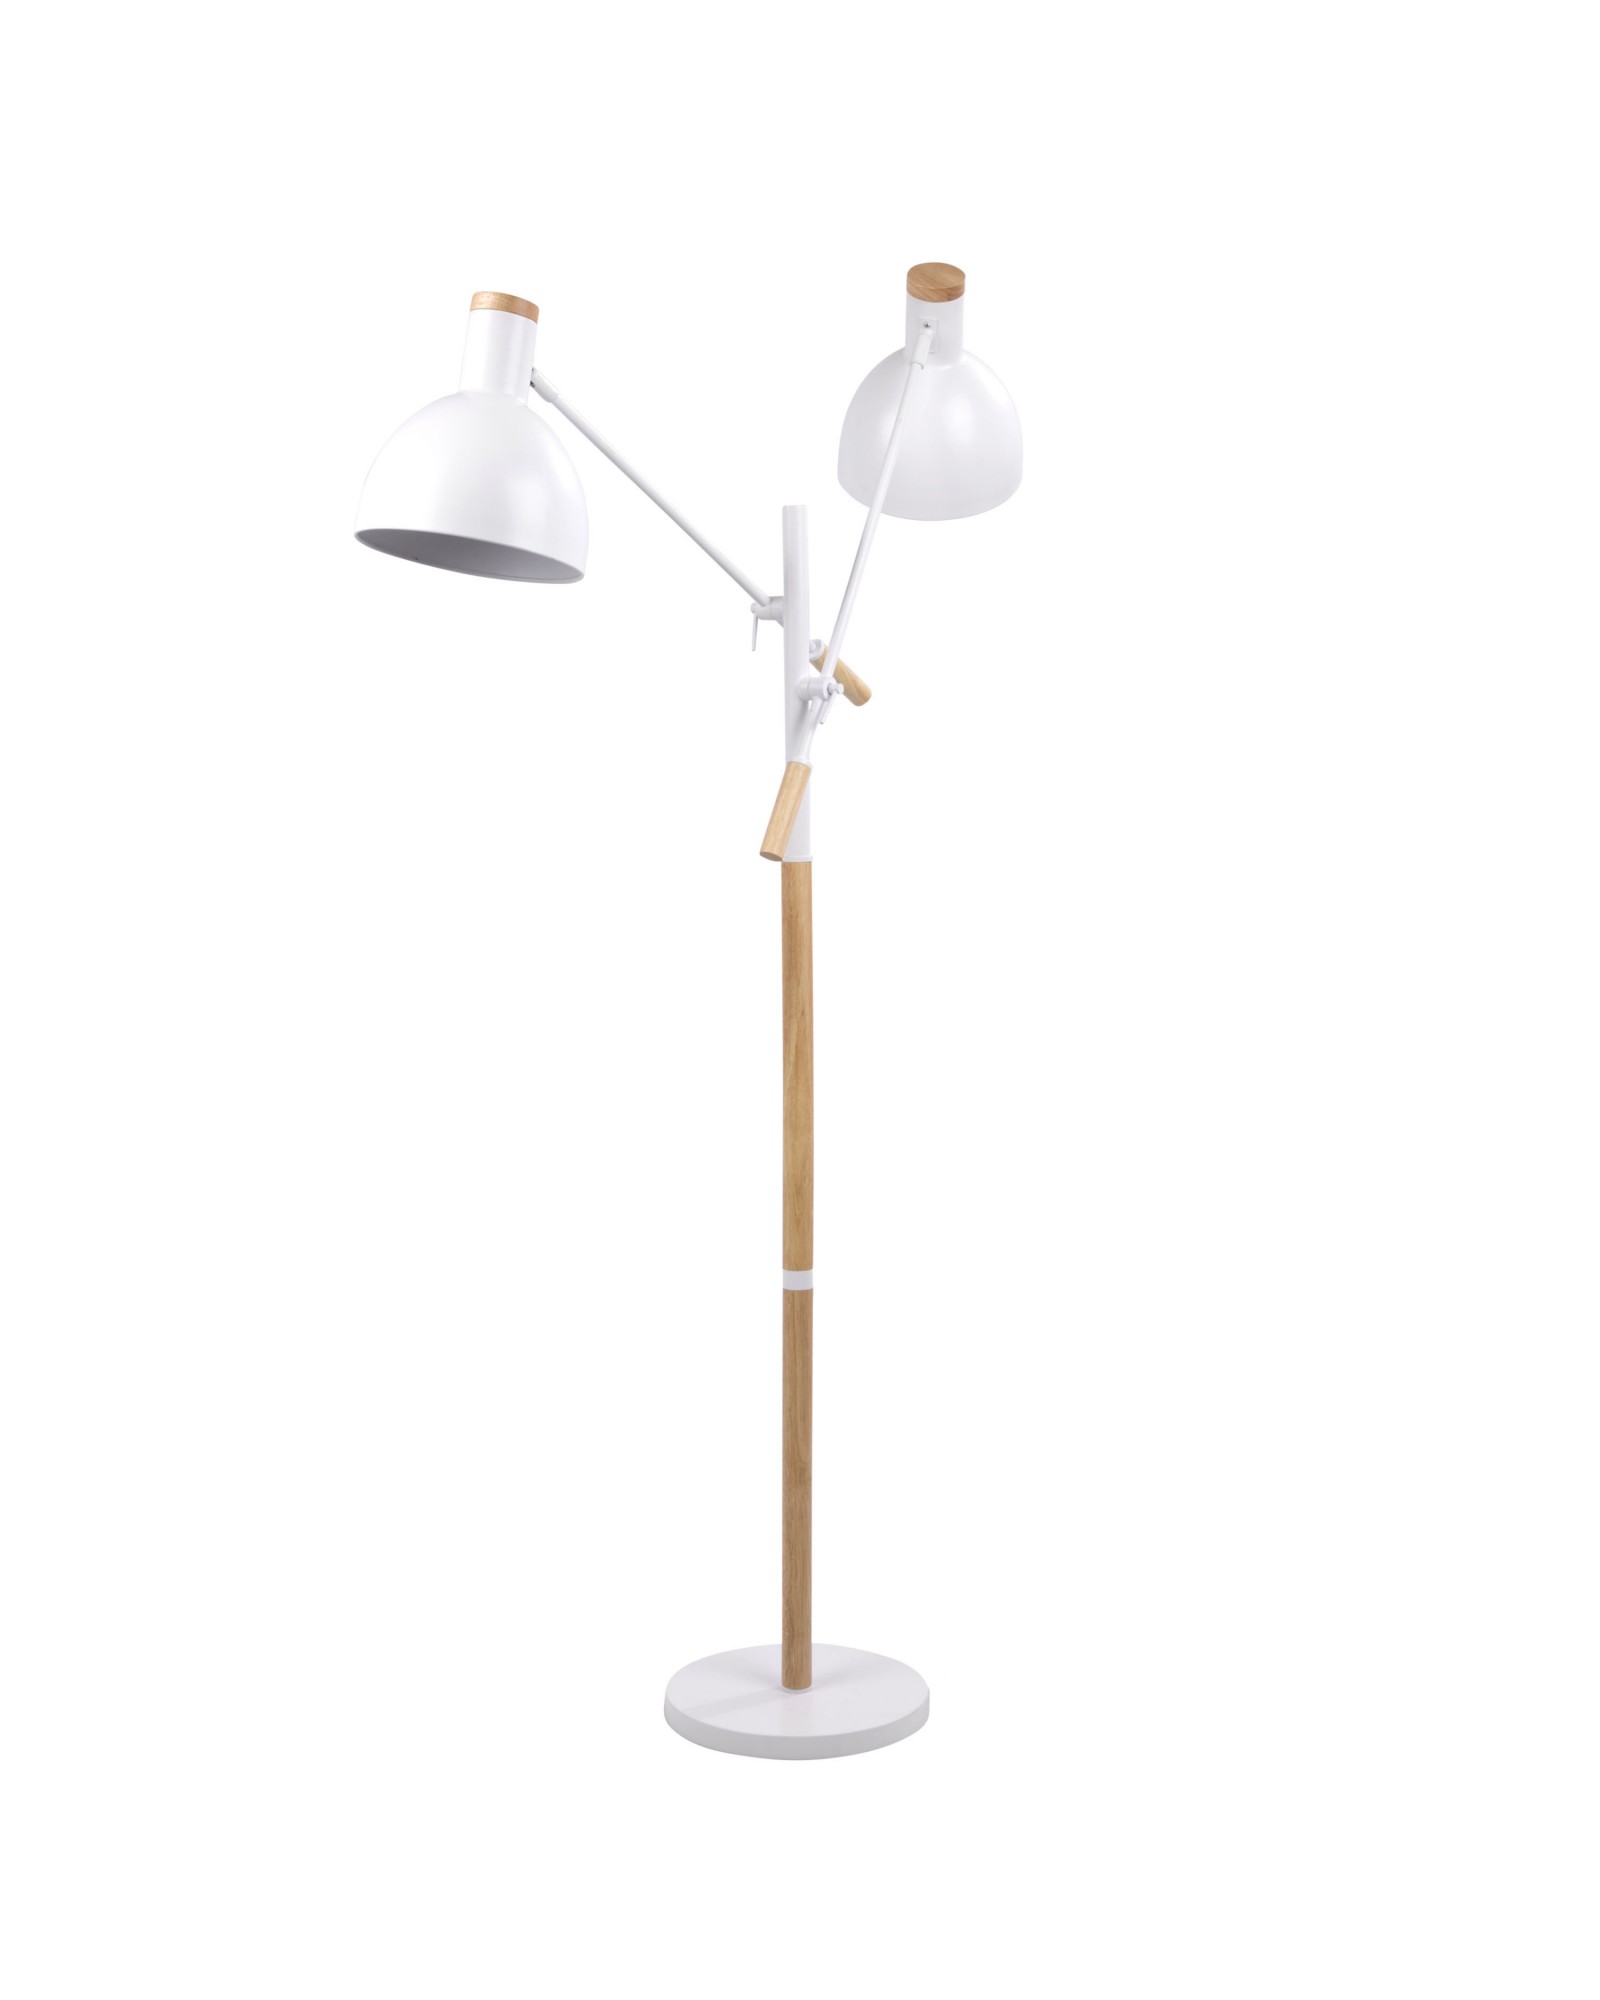 Pix Duo Contemporary Floor Lamp in Natural Wood and Matte White